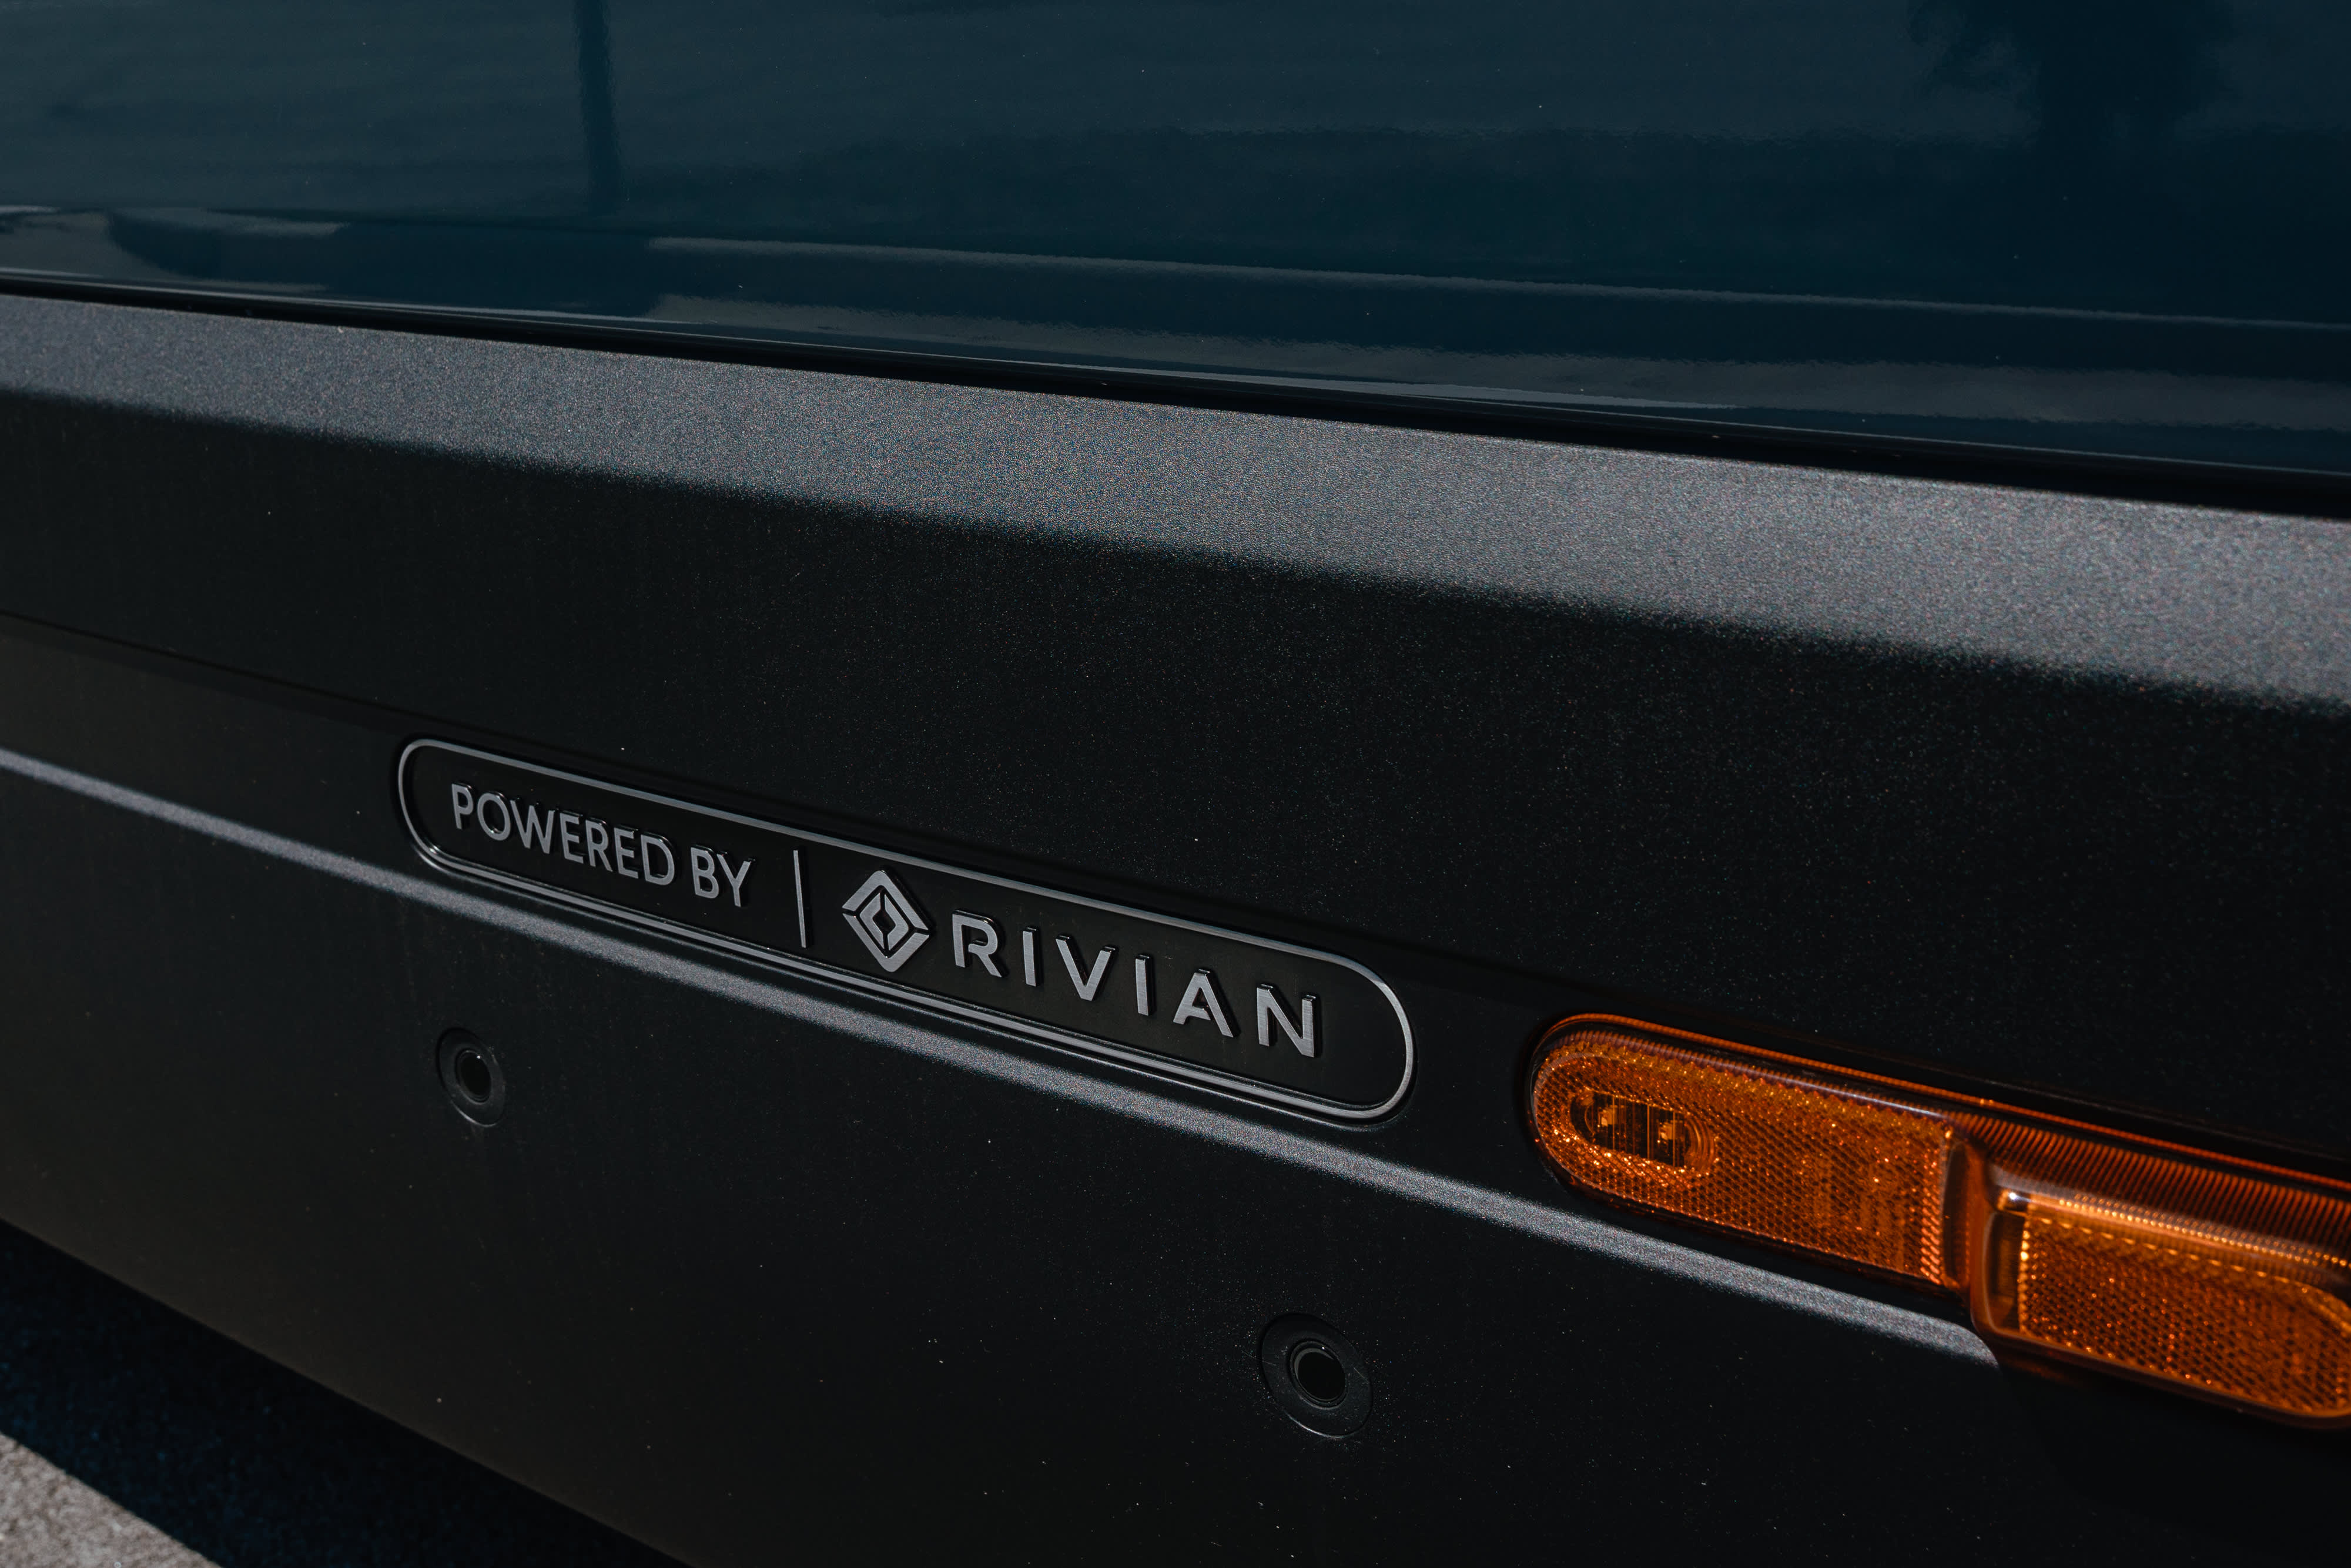 Rivian shares keep hitting all-time lows. Here's where Wall Street sees it going next